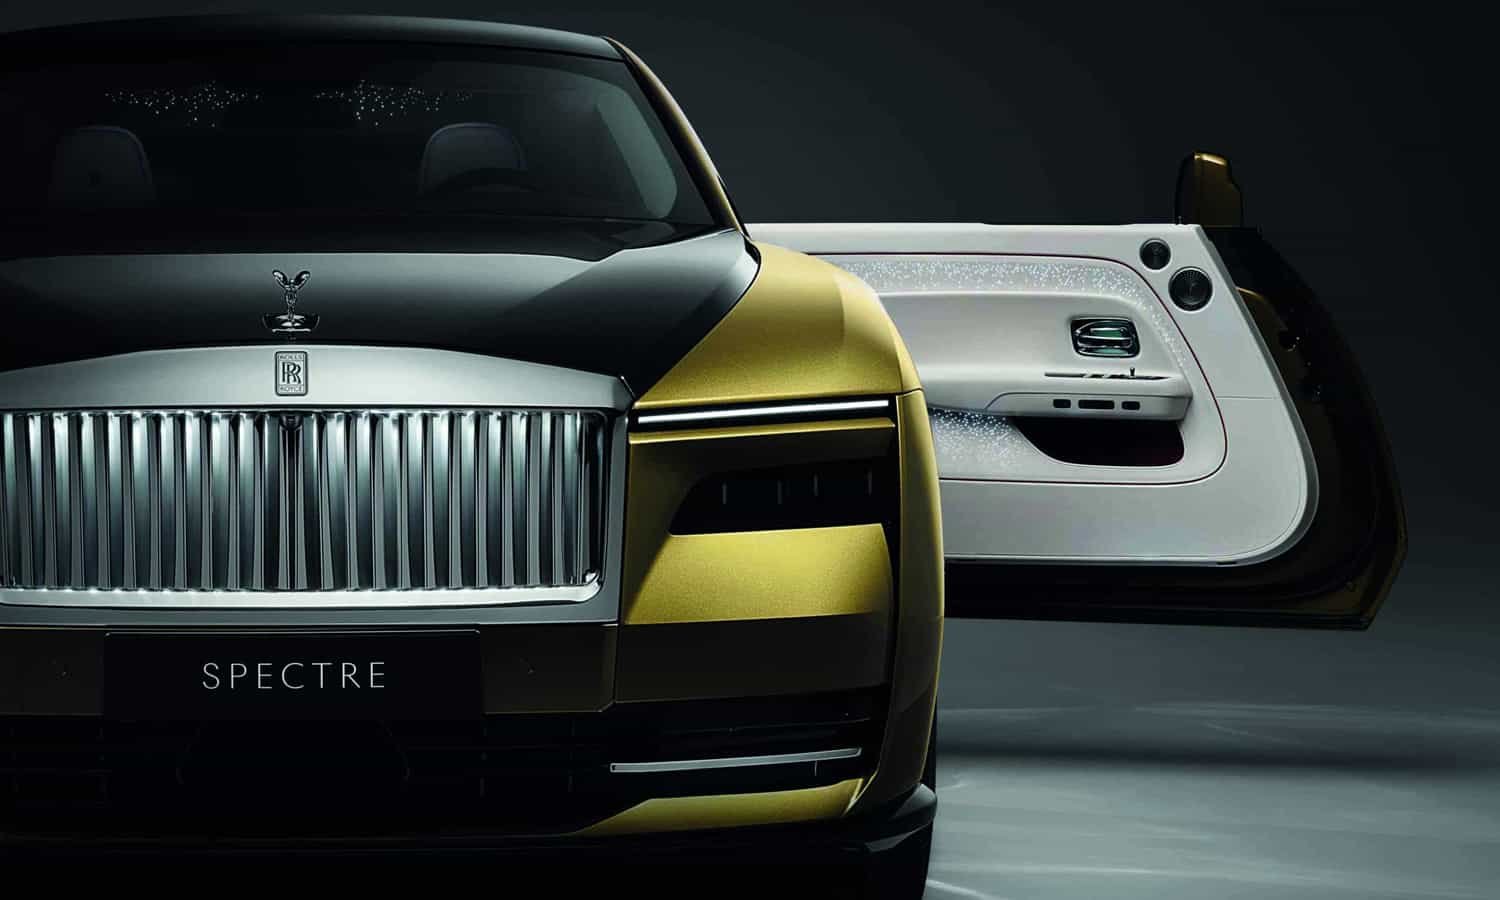 The Rolls Royce Spectre is showcased in a dimly lit room at the RREC Home.